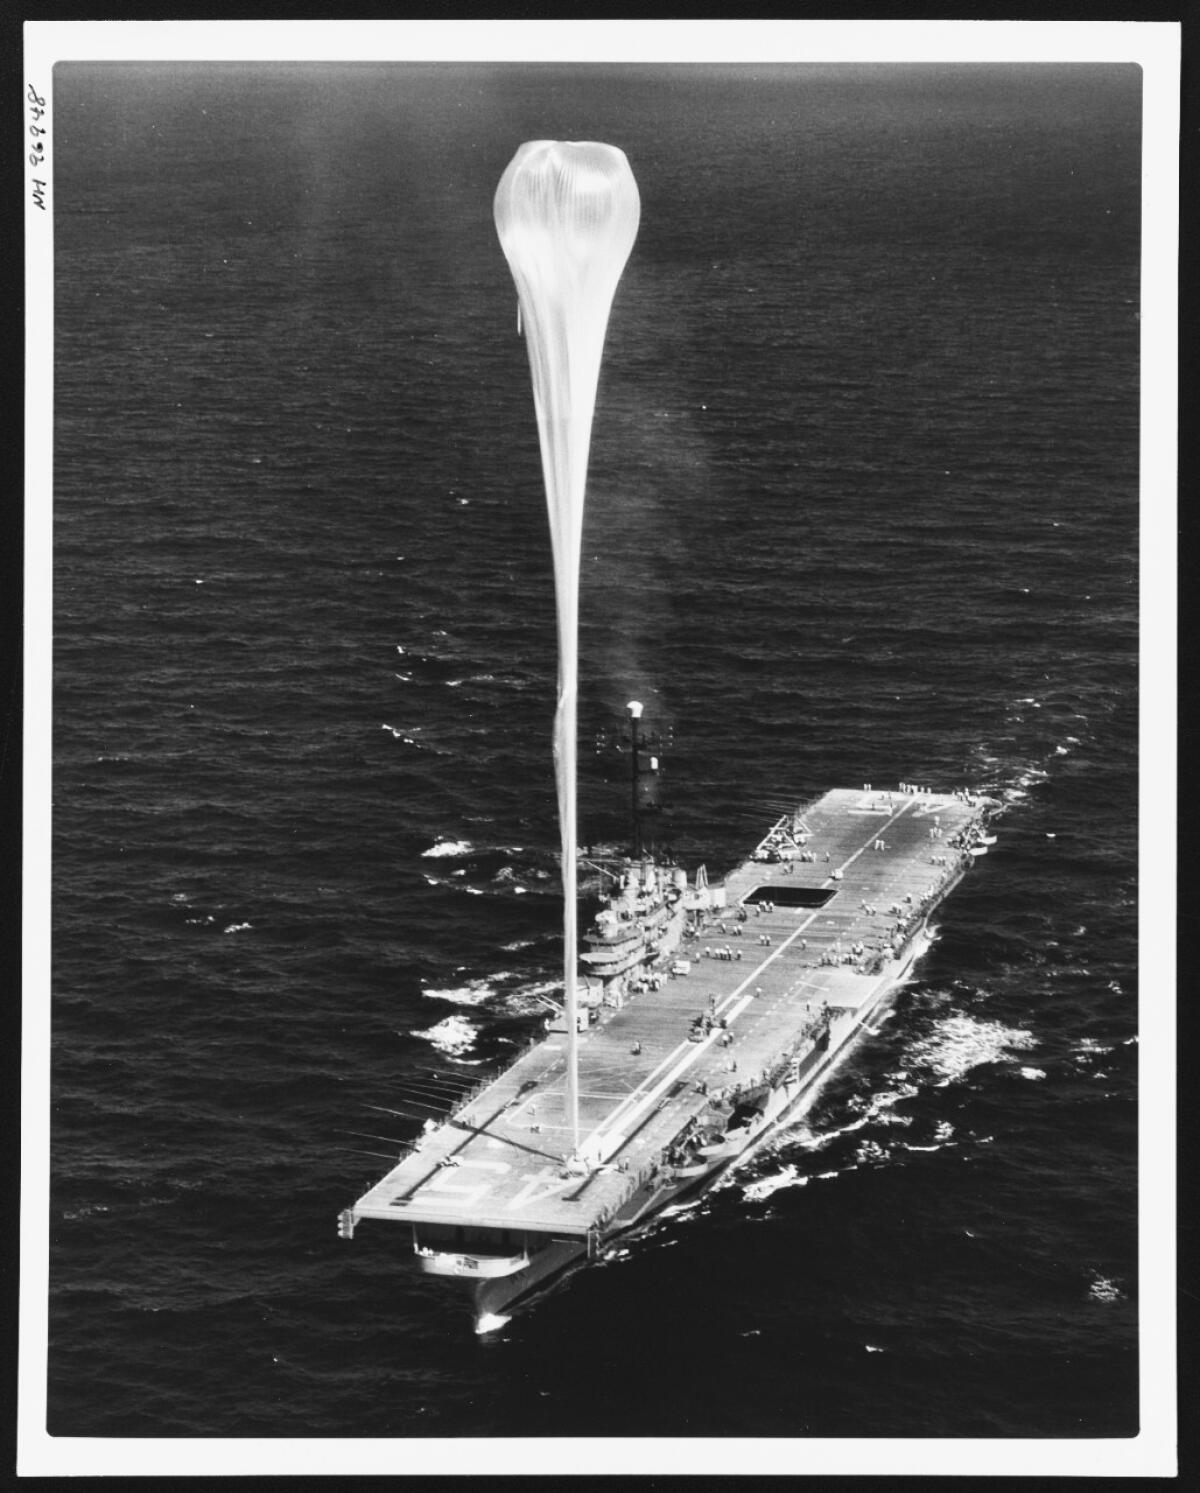 A very tall weather balloon moored to a U.S. aircraft carrier in an old black-and-white photo.